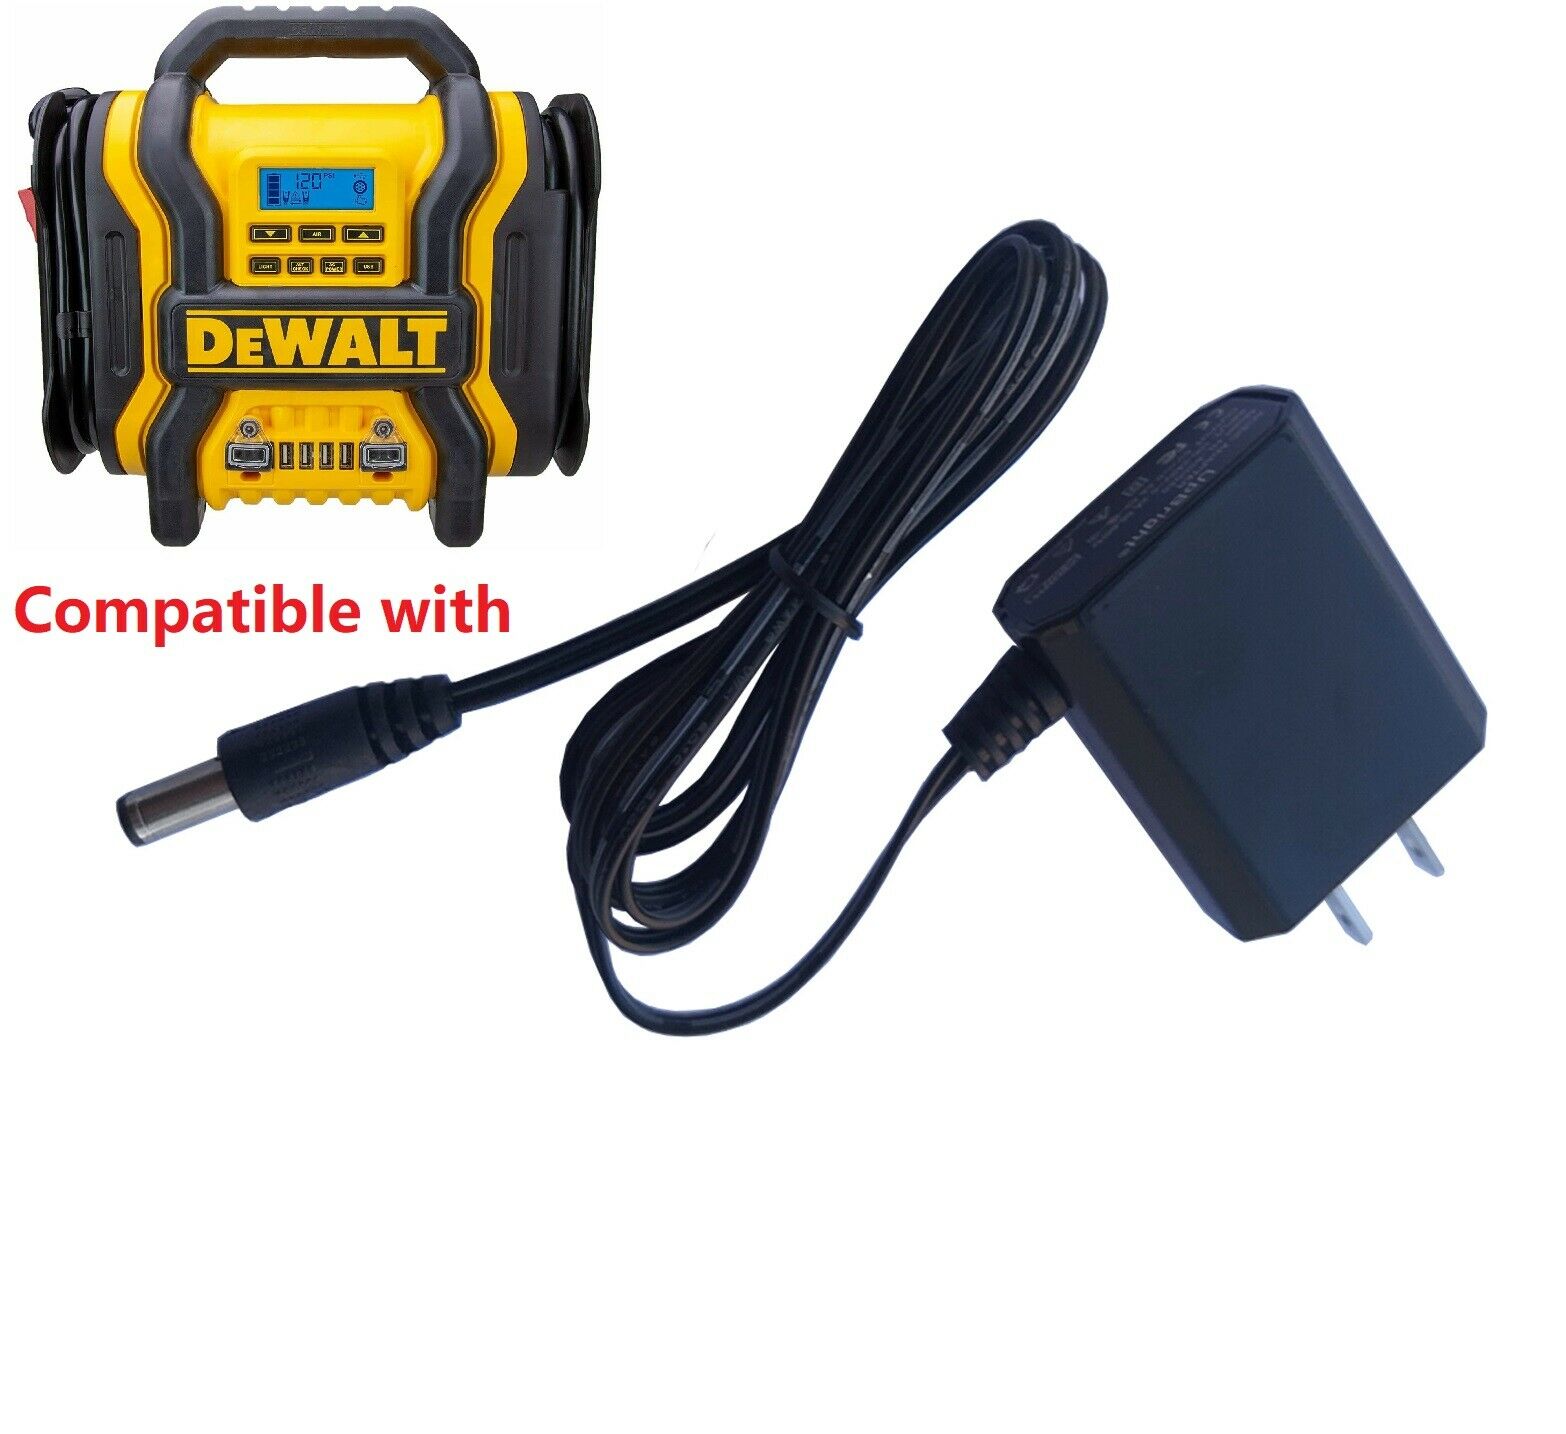 AC/DC Adapter Charger For Dewalt DXAEJ14 1400 Peak Amp Jump Starter Power Supply Specifications: Type: AC to DC Standar